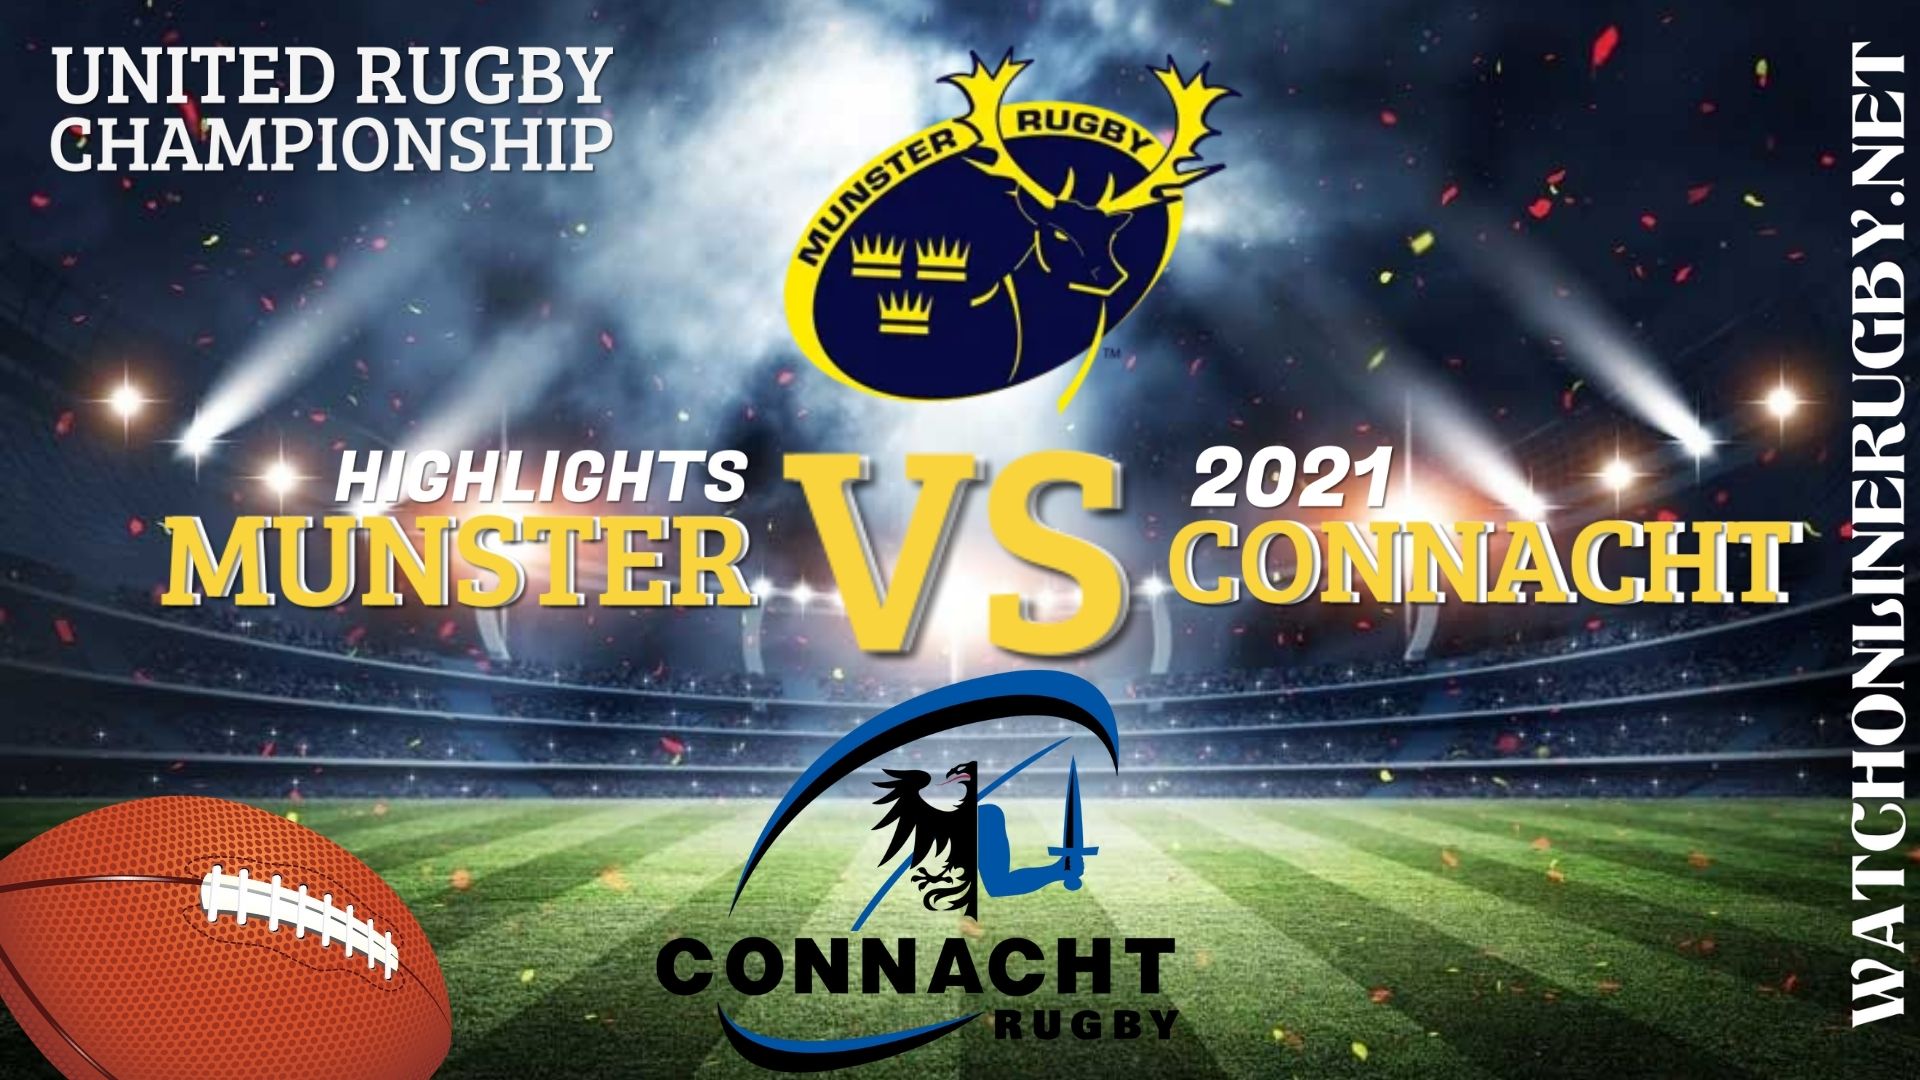 Munster Vs Connacht United Rugby Championship 2021 RD 4